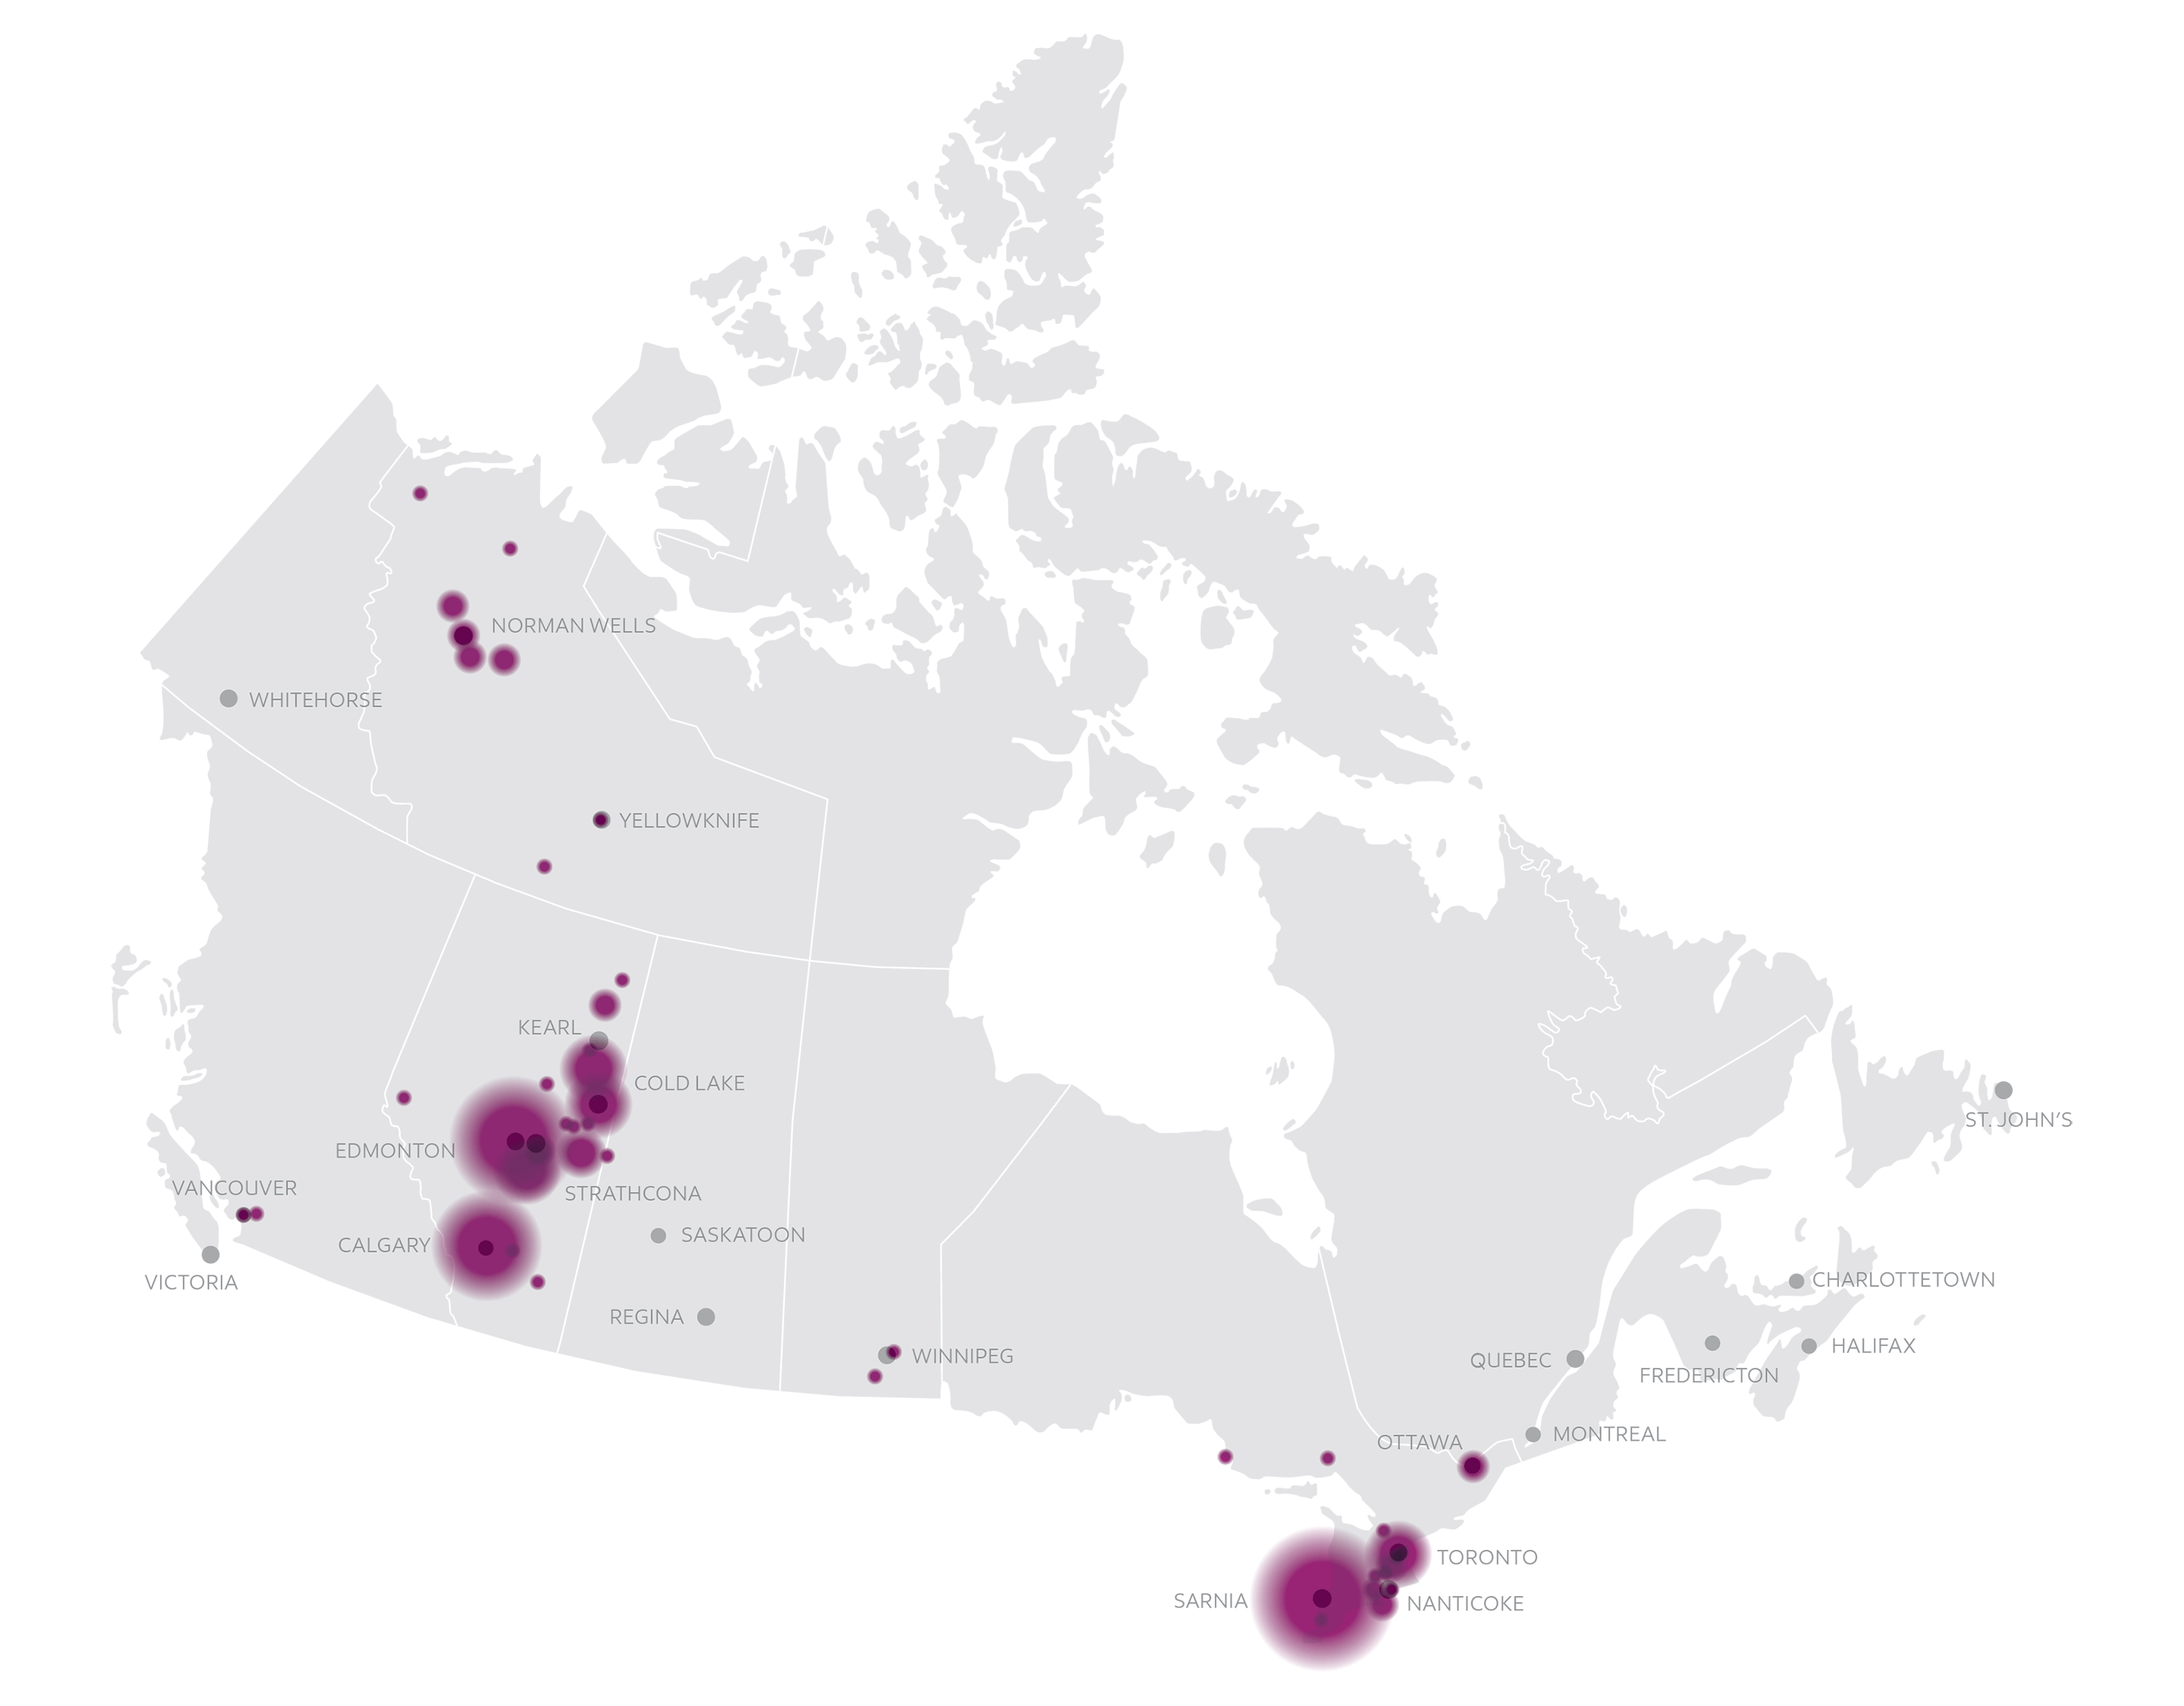 Canadian map depicting Imperial’s community contributions across the country